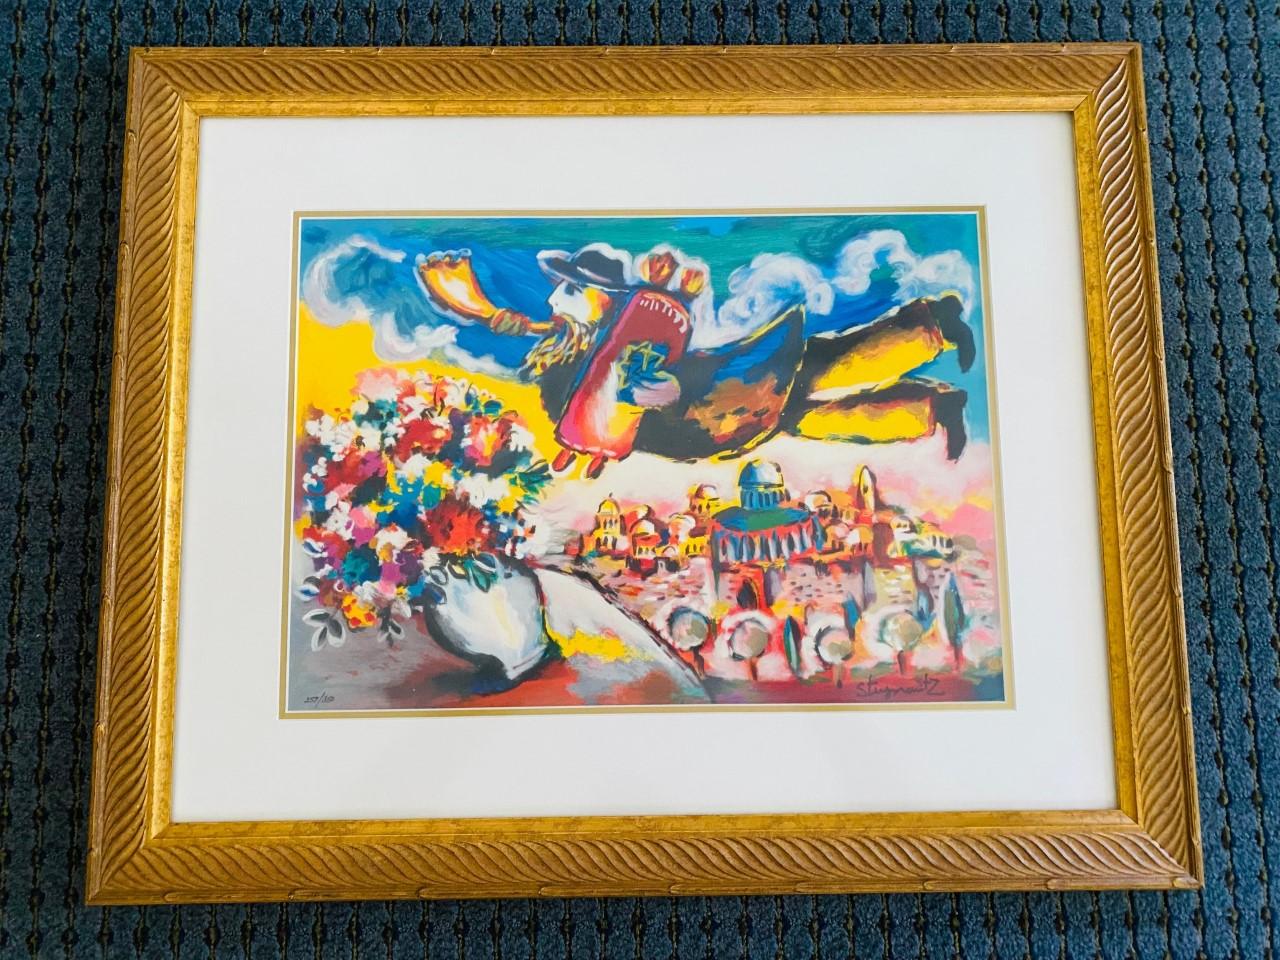 Showing talent from an early age, Polish-born artist Zamy Steynovitz used rich, vibrant color in his works after a trip to South America in the 80s increased his interest in bright, colorful subjects. Zamy Steynovitz's originals include serigraphs,